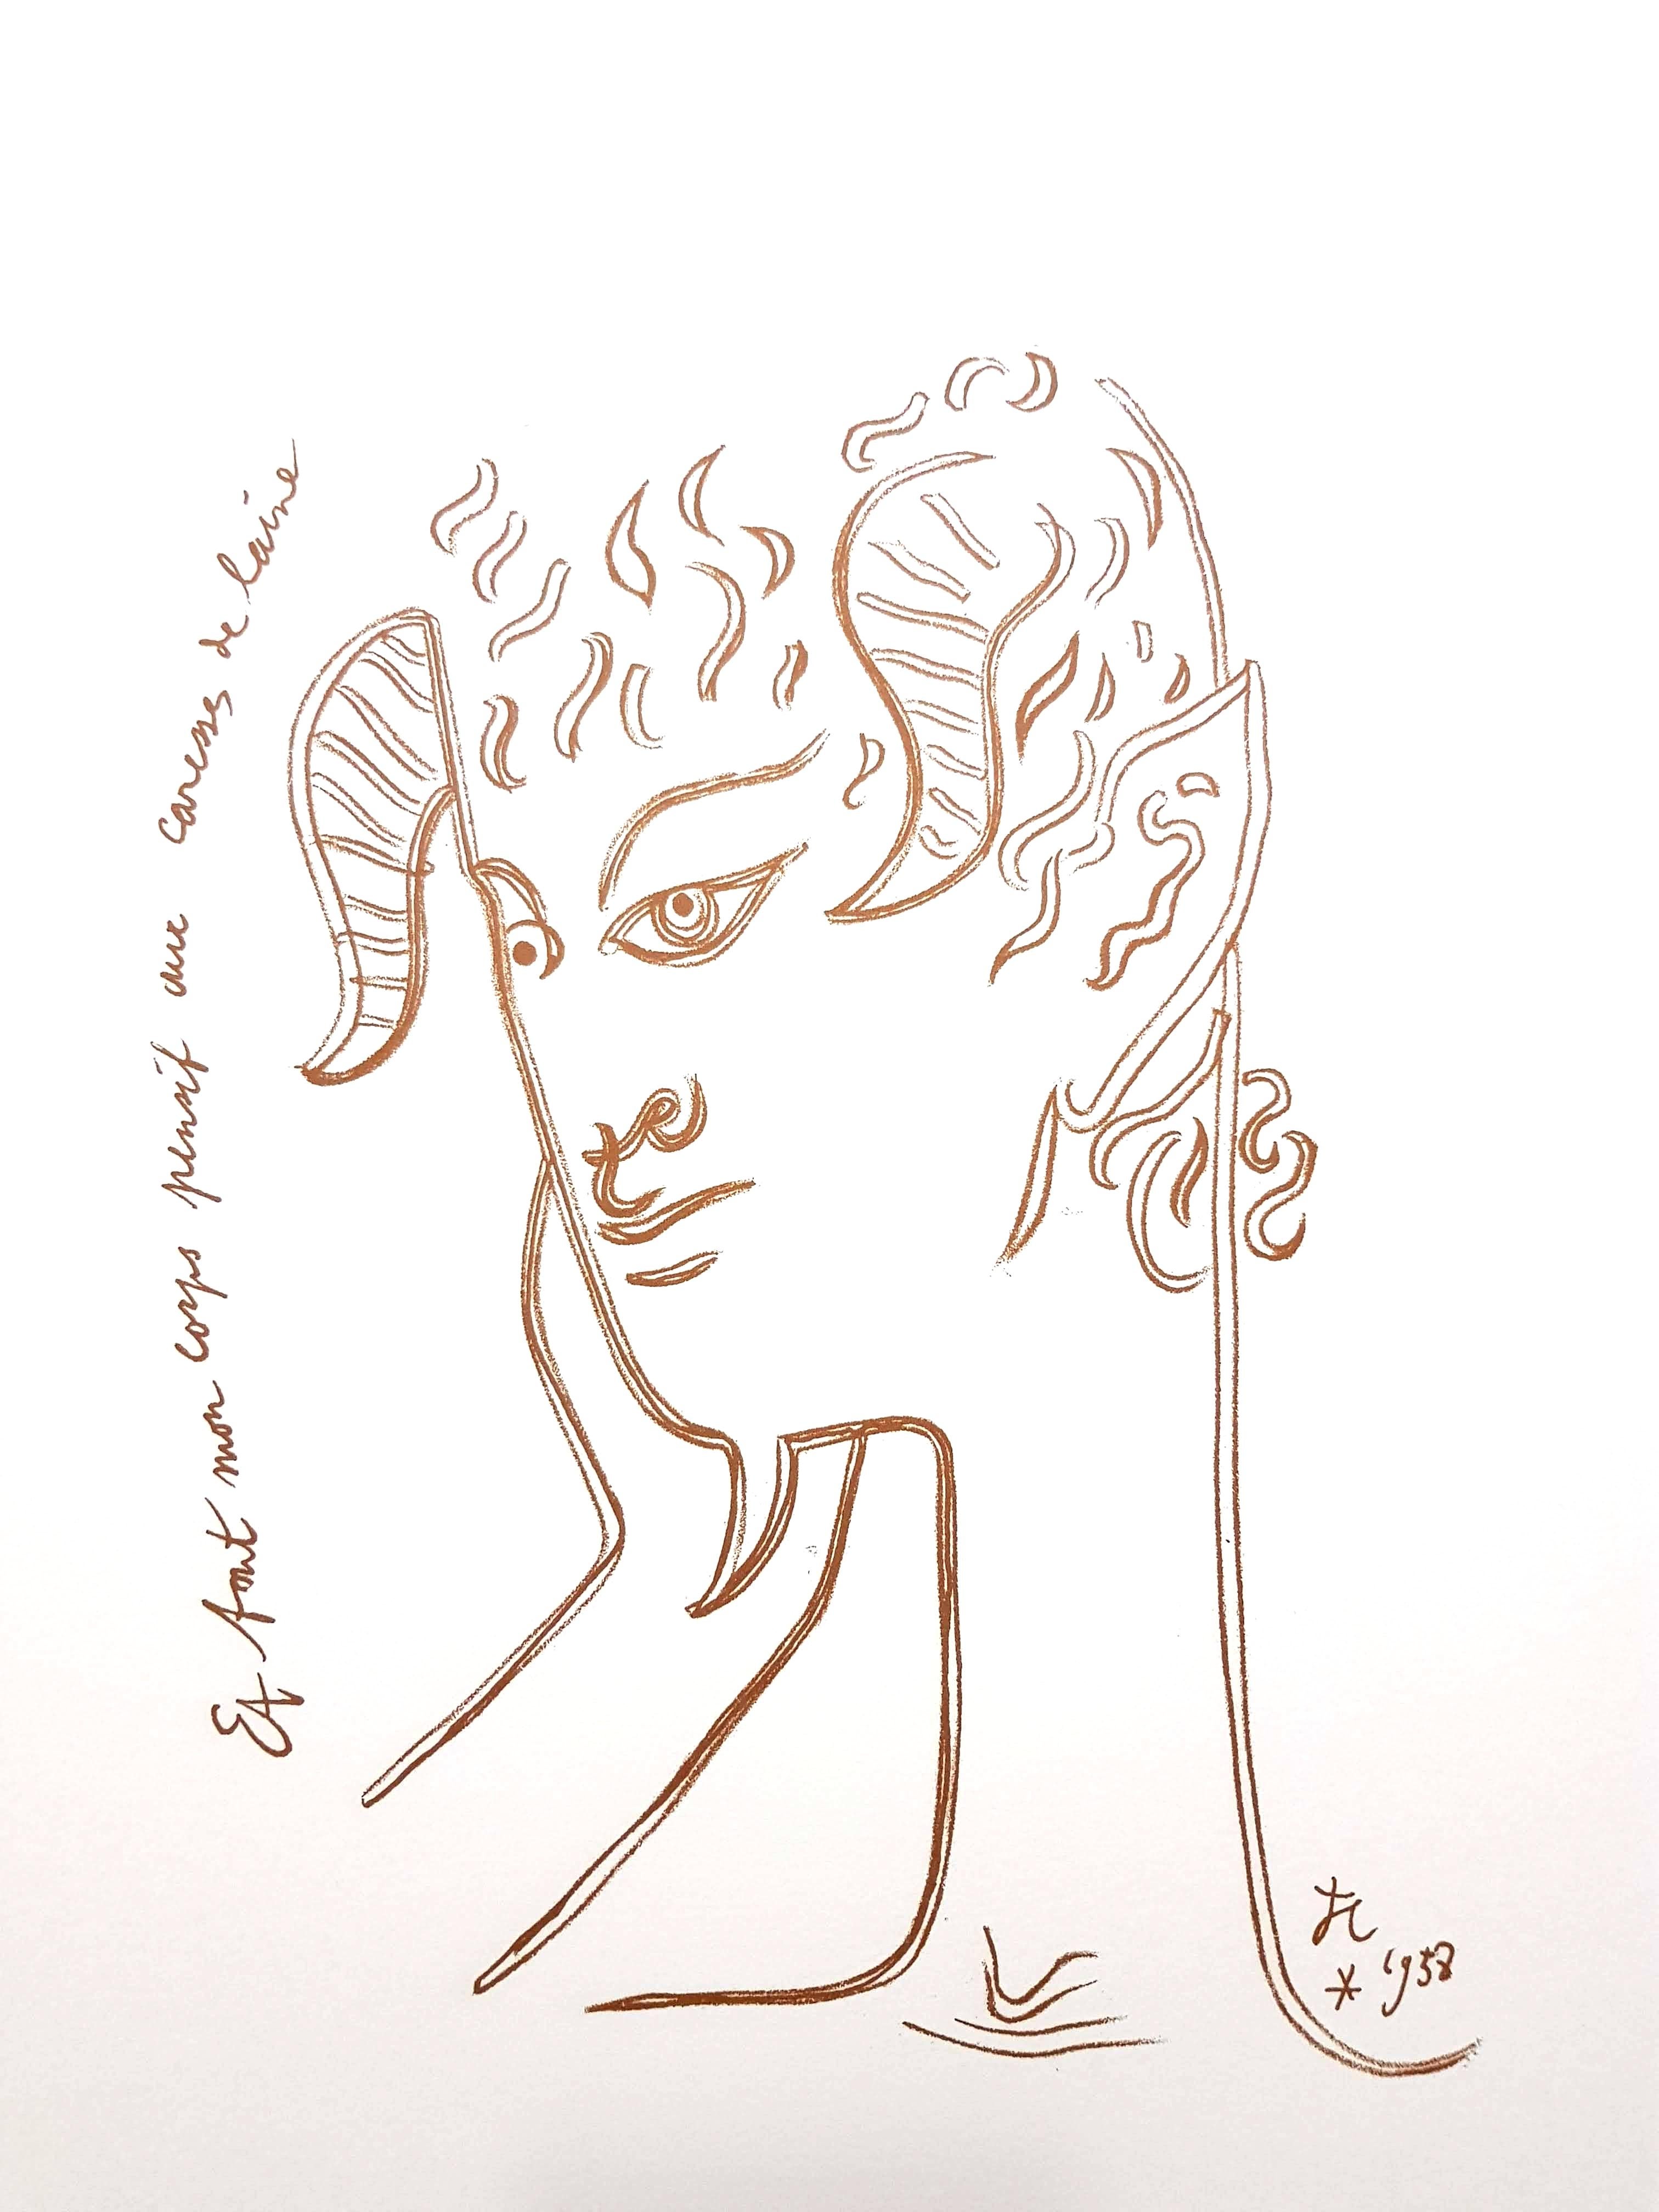 Original Lithograph by Jean Cocteau
Title: Reflections
Signed in the plate
Dimensions: 32 x 25.5 cm
Edition: 200
1959
Publisher: Bibliophiles Du Palais
Unnumbered as issued